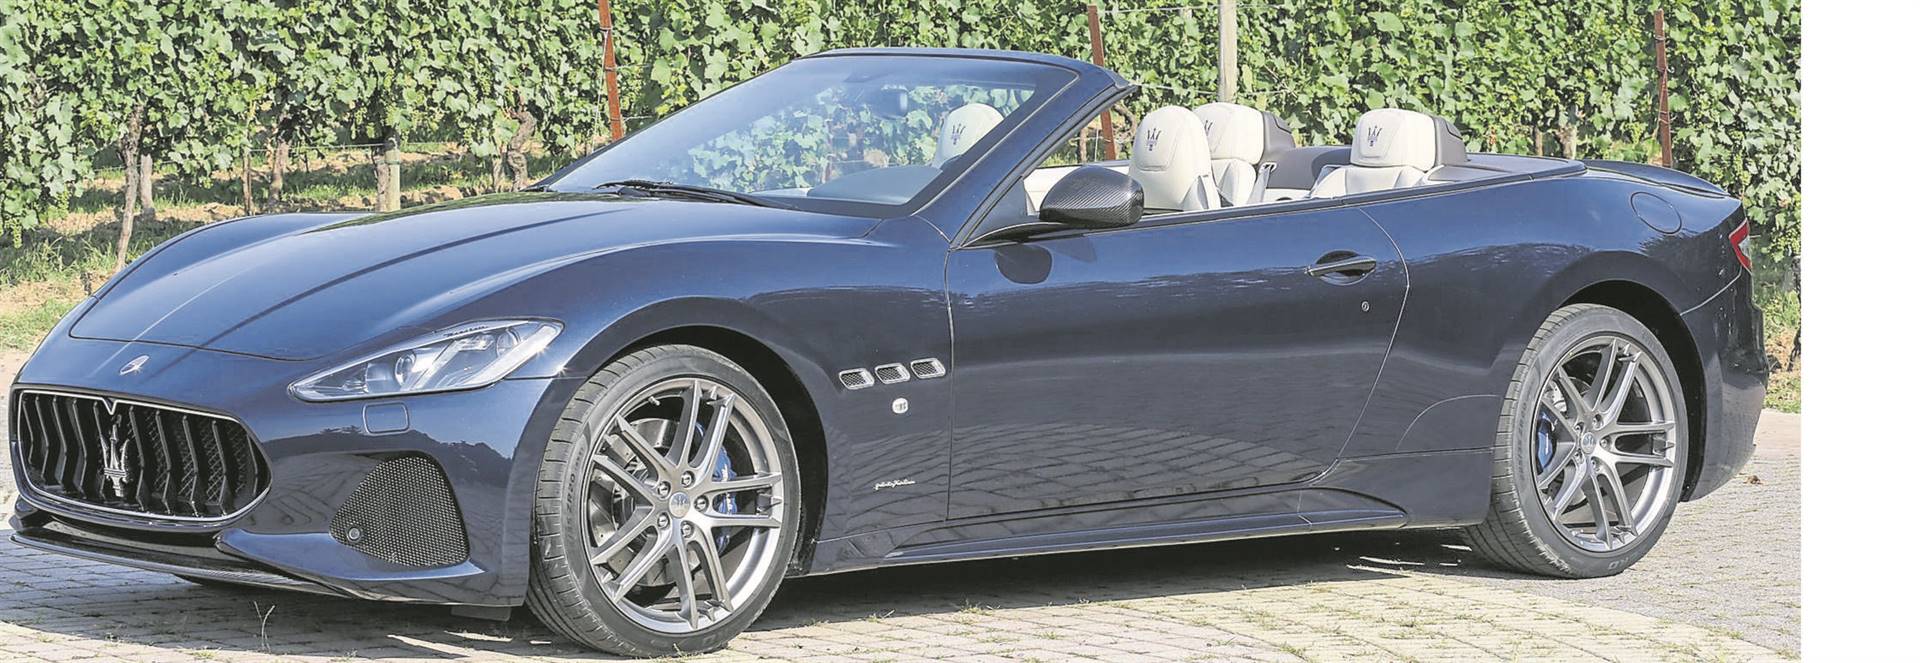 The ultra-luxurious Maserati GranTurismo GT Coup&#233;, like the one bought by Herbert Msagala